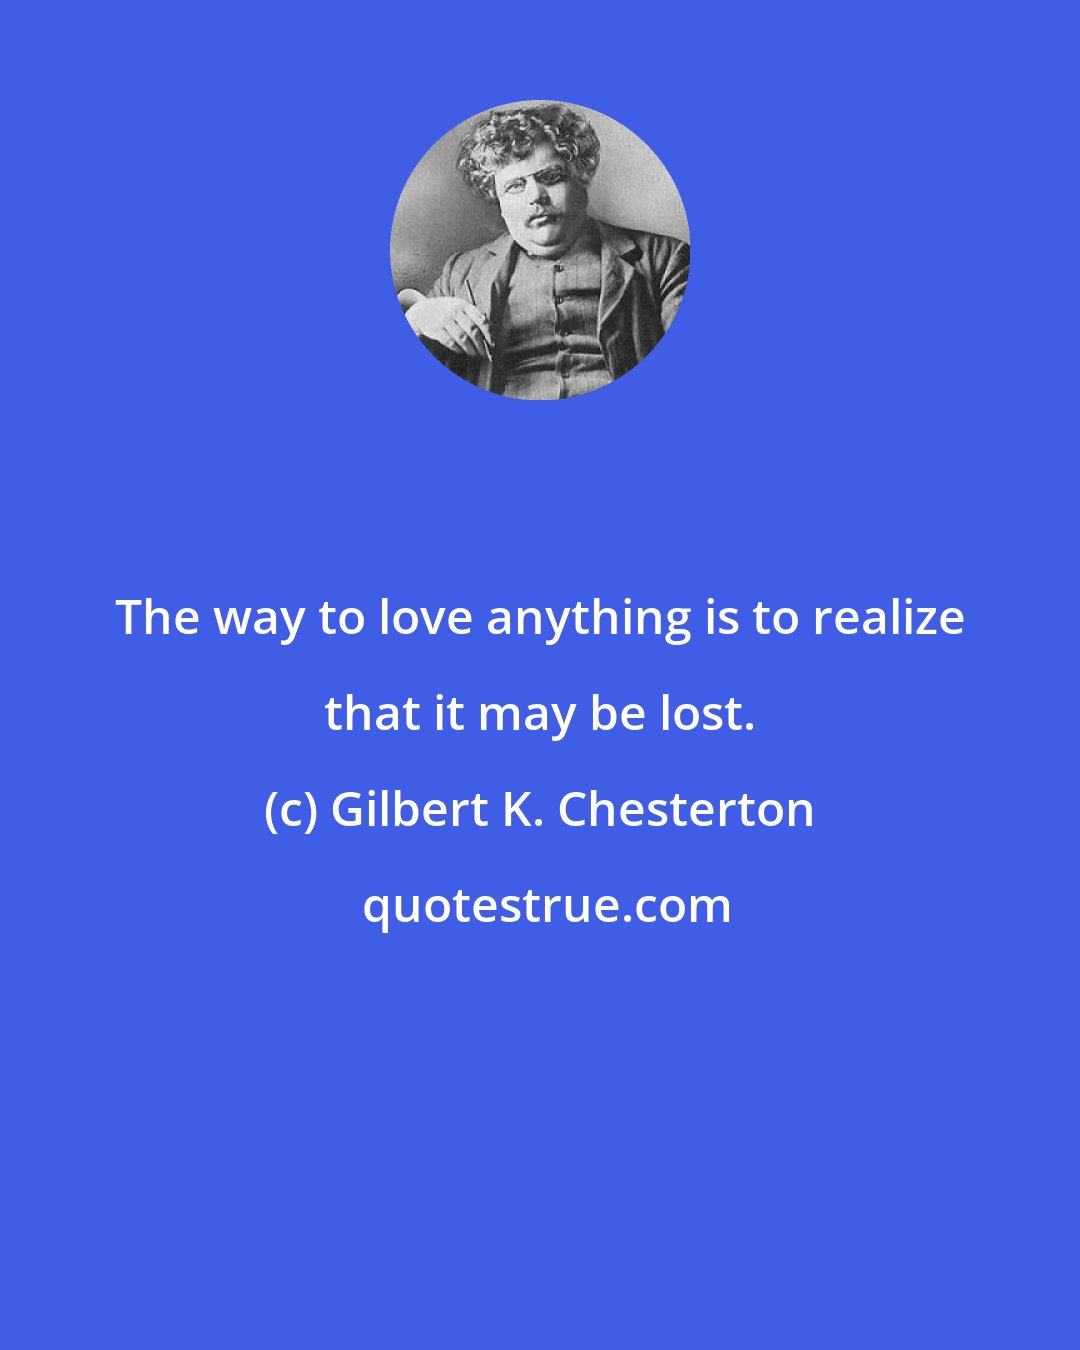 Gilbert K. Chesterton: The way to love anything is to realize that it may be lost.